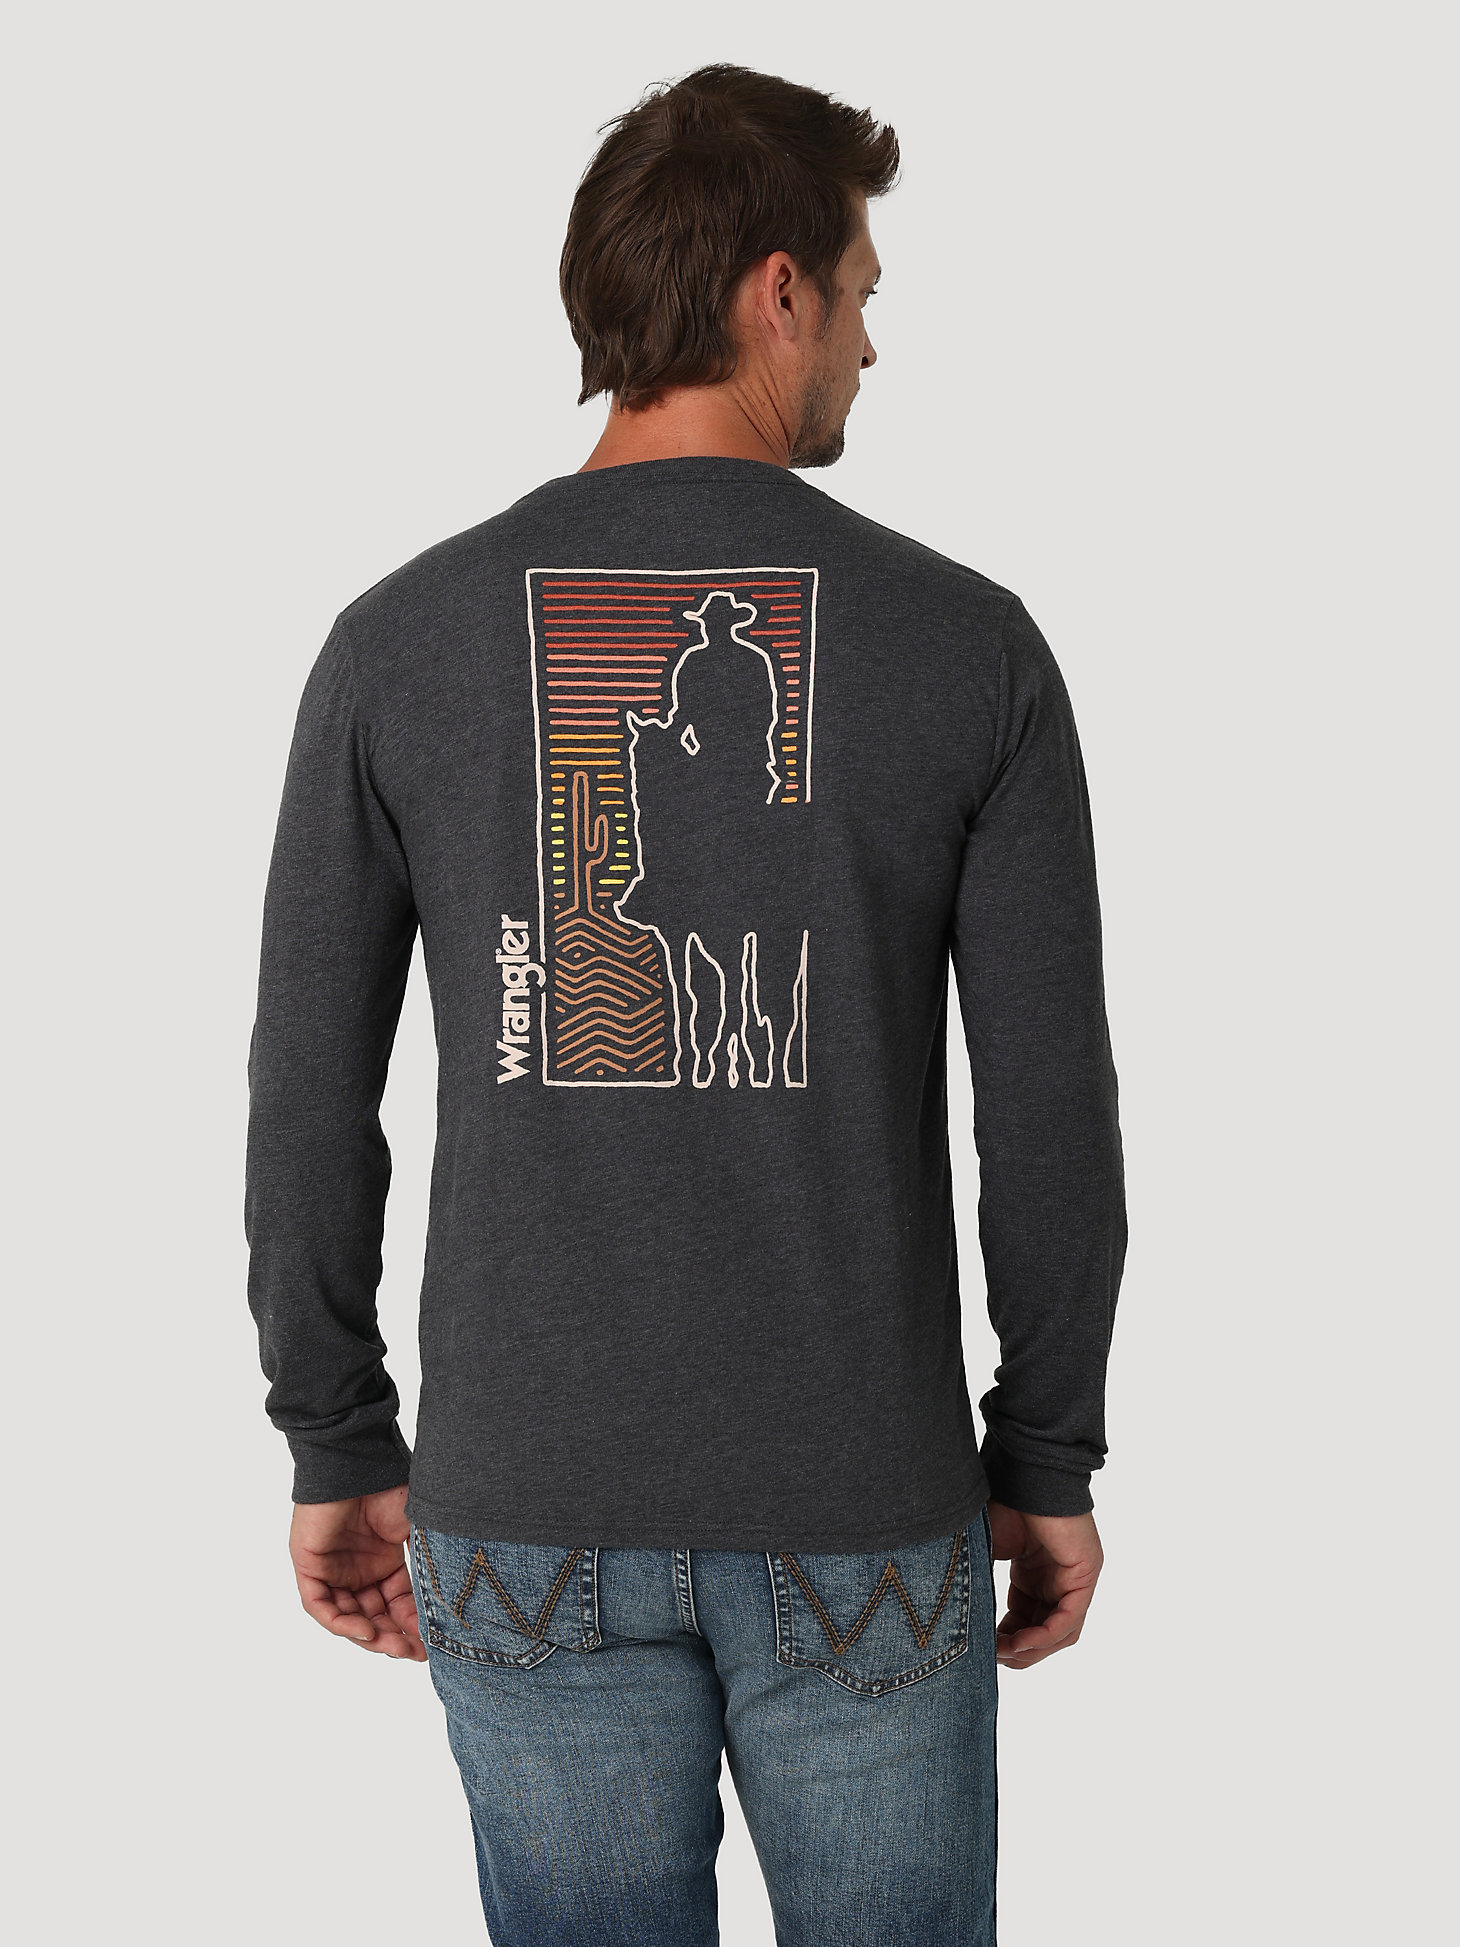 Men's Long Sleeve Carved Cowboy Graphic T-Shirt in Onyx alternative view 1